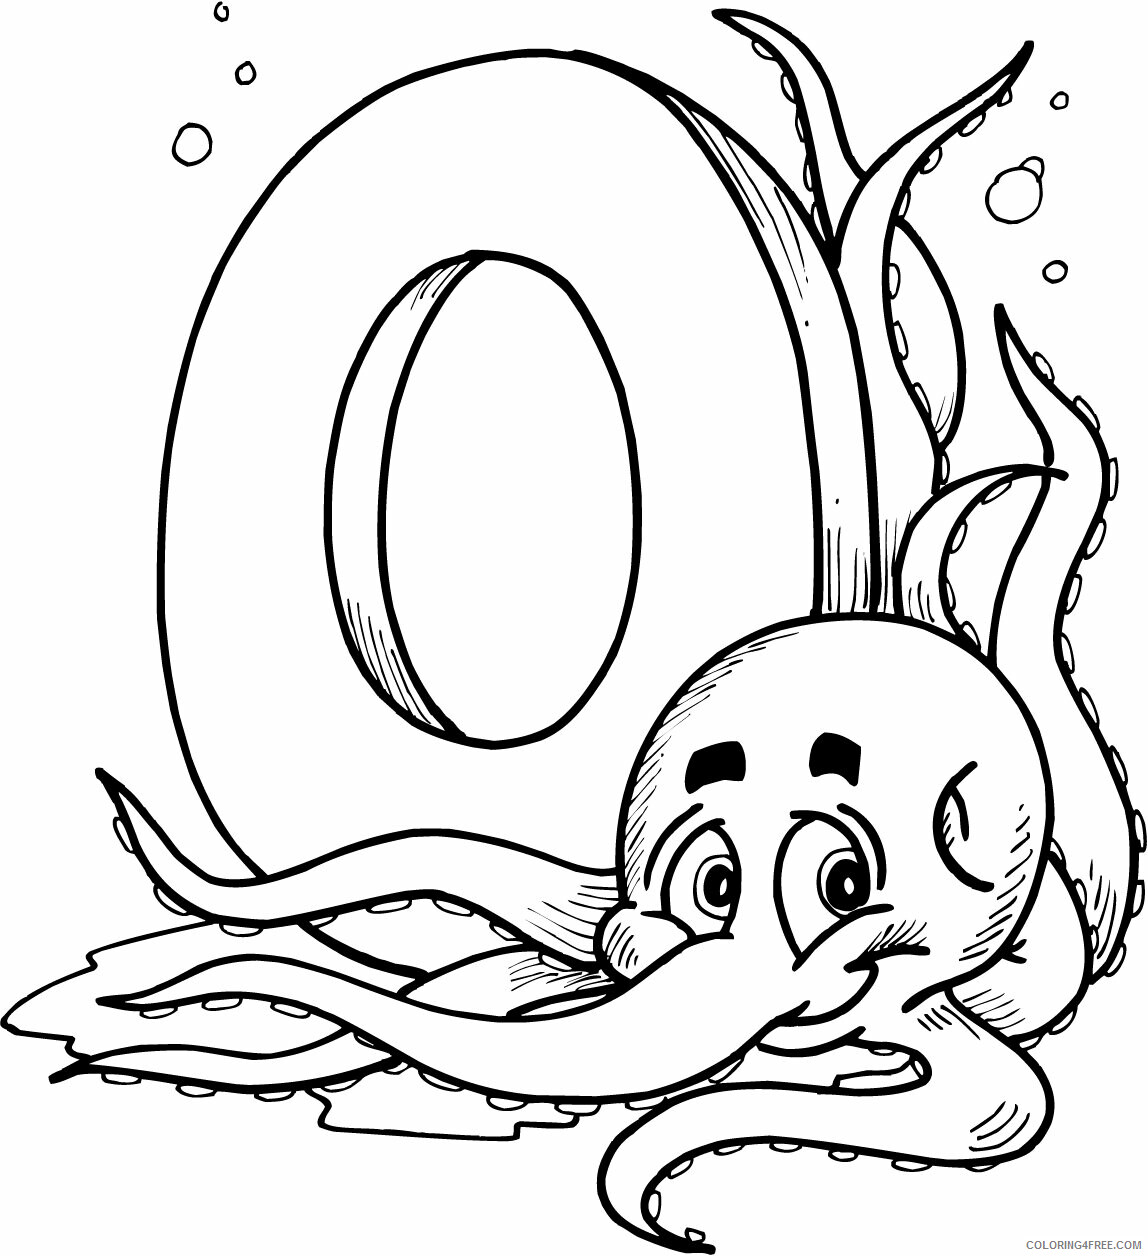 Octopus Coloring Pages Animal Printable Sheets O is for Octopus 2021 3538 Coloring4free